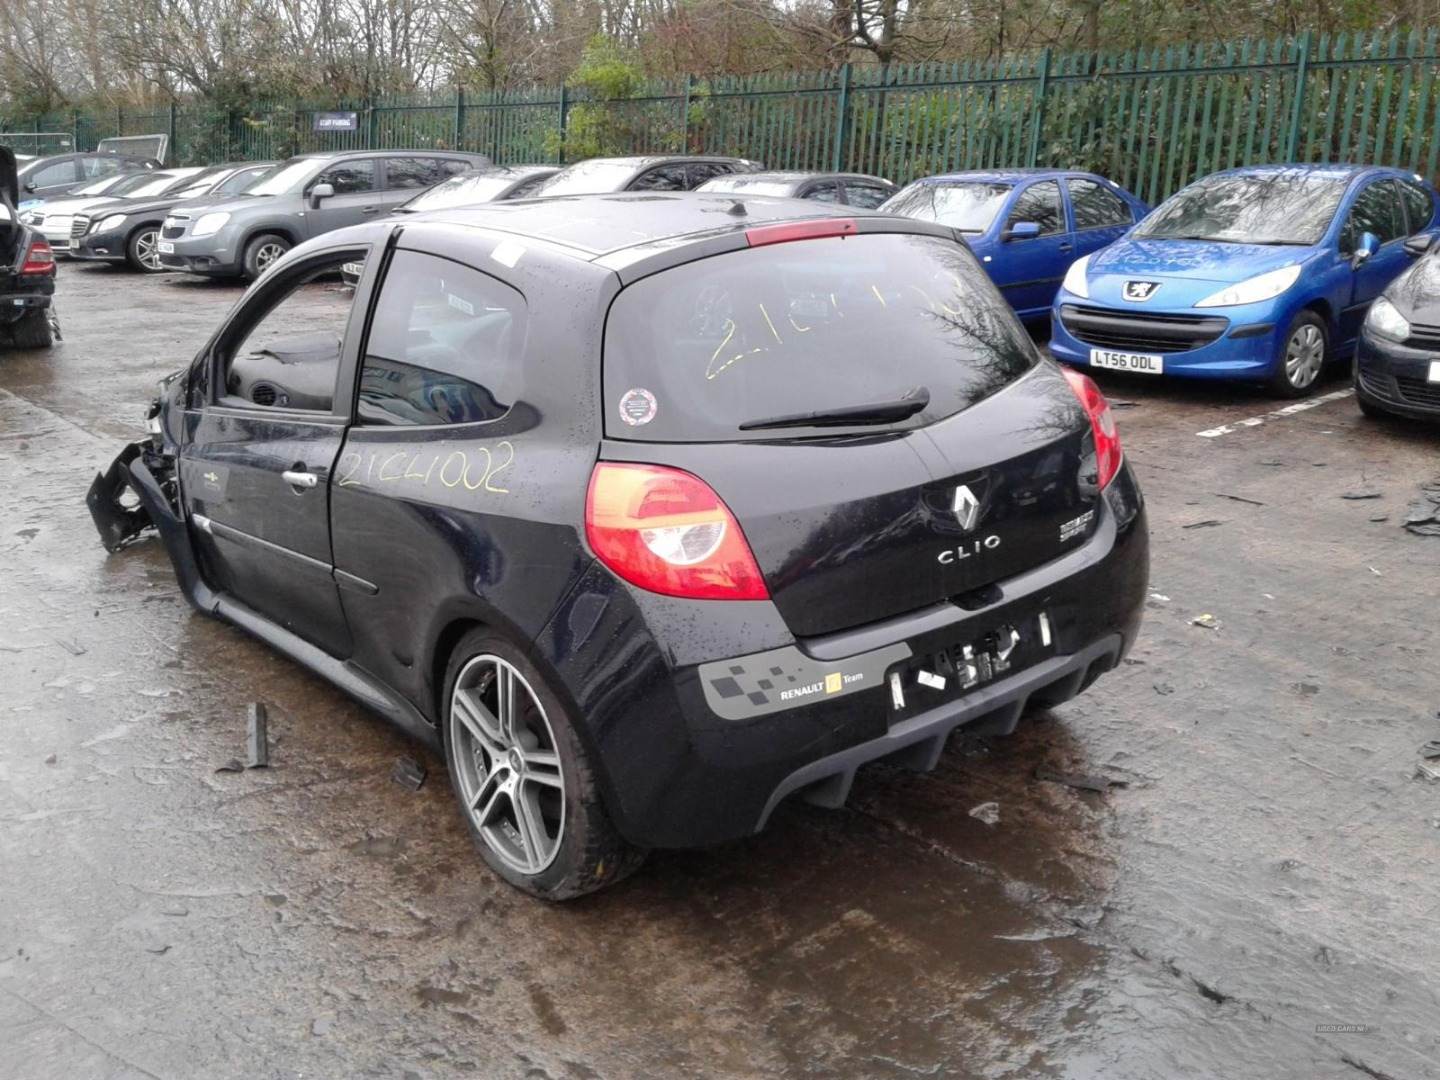 Renault Clio 3 Phase 1 3Doors RS F1 Team 2.0 16v Renault Sport